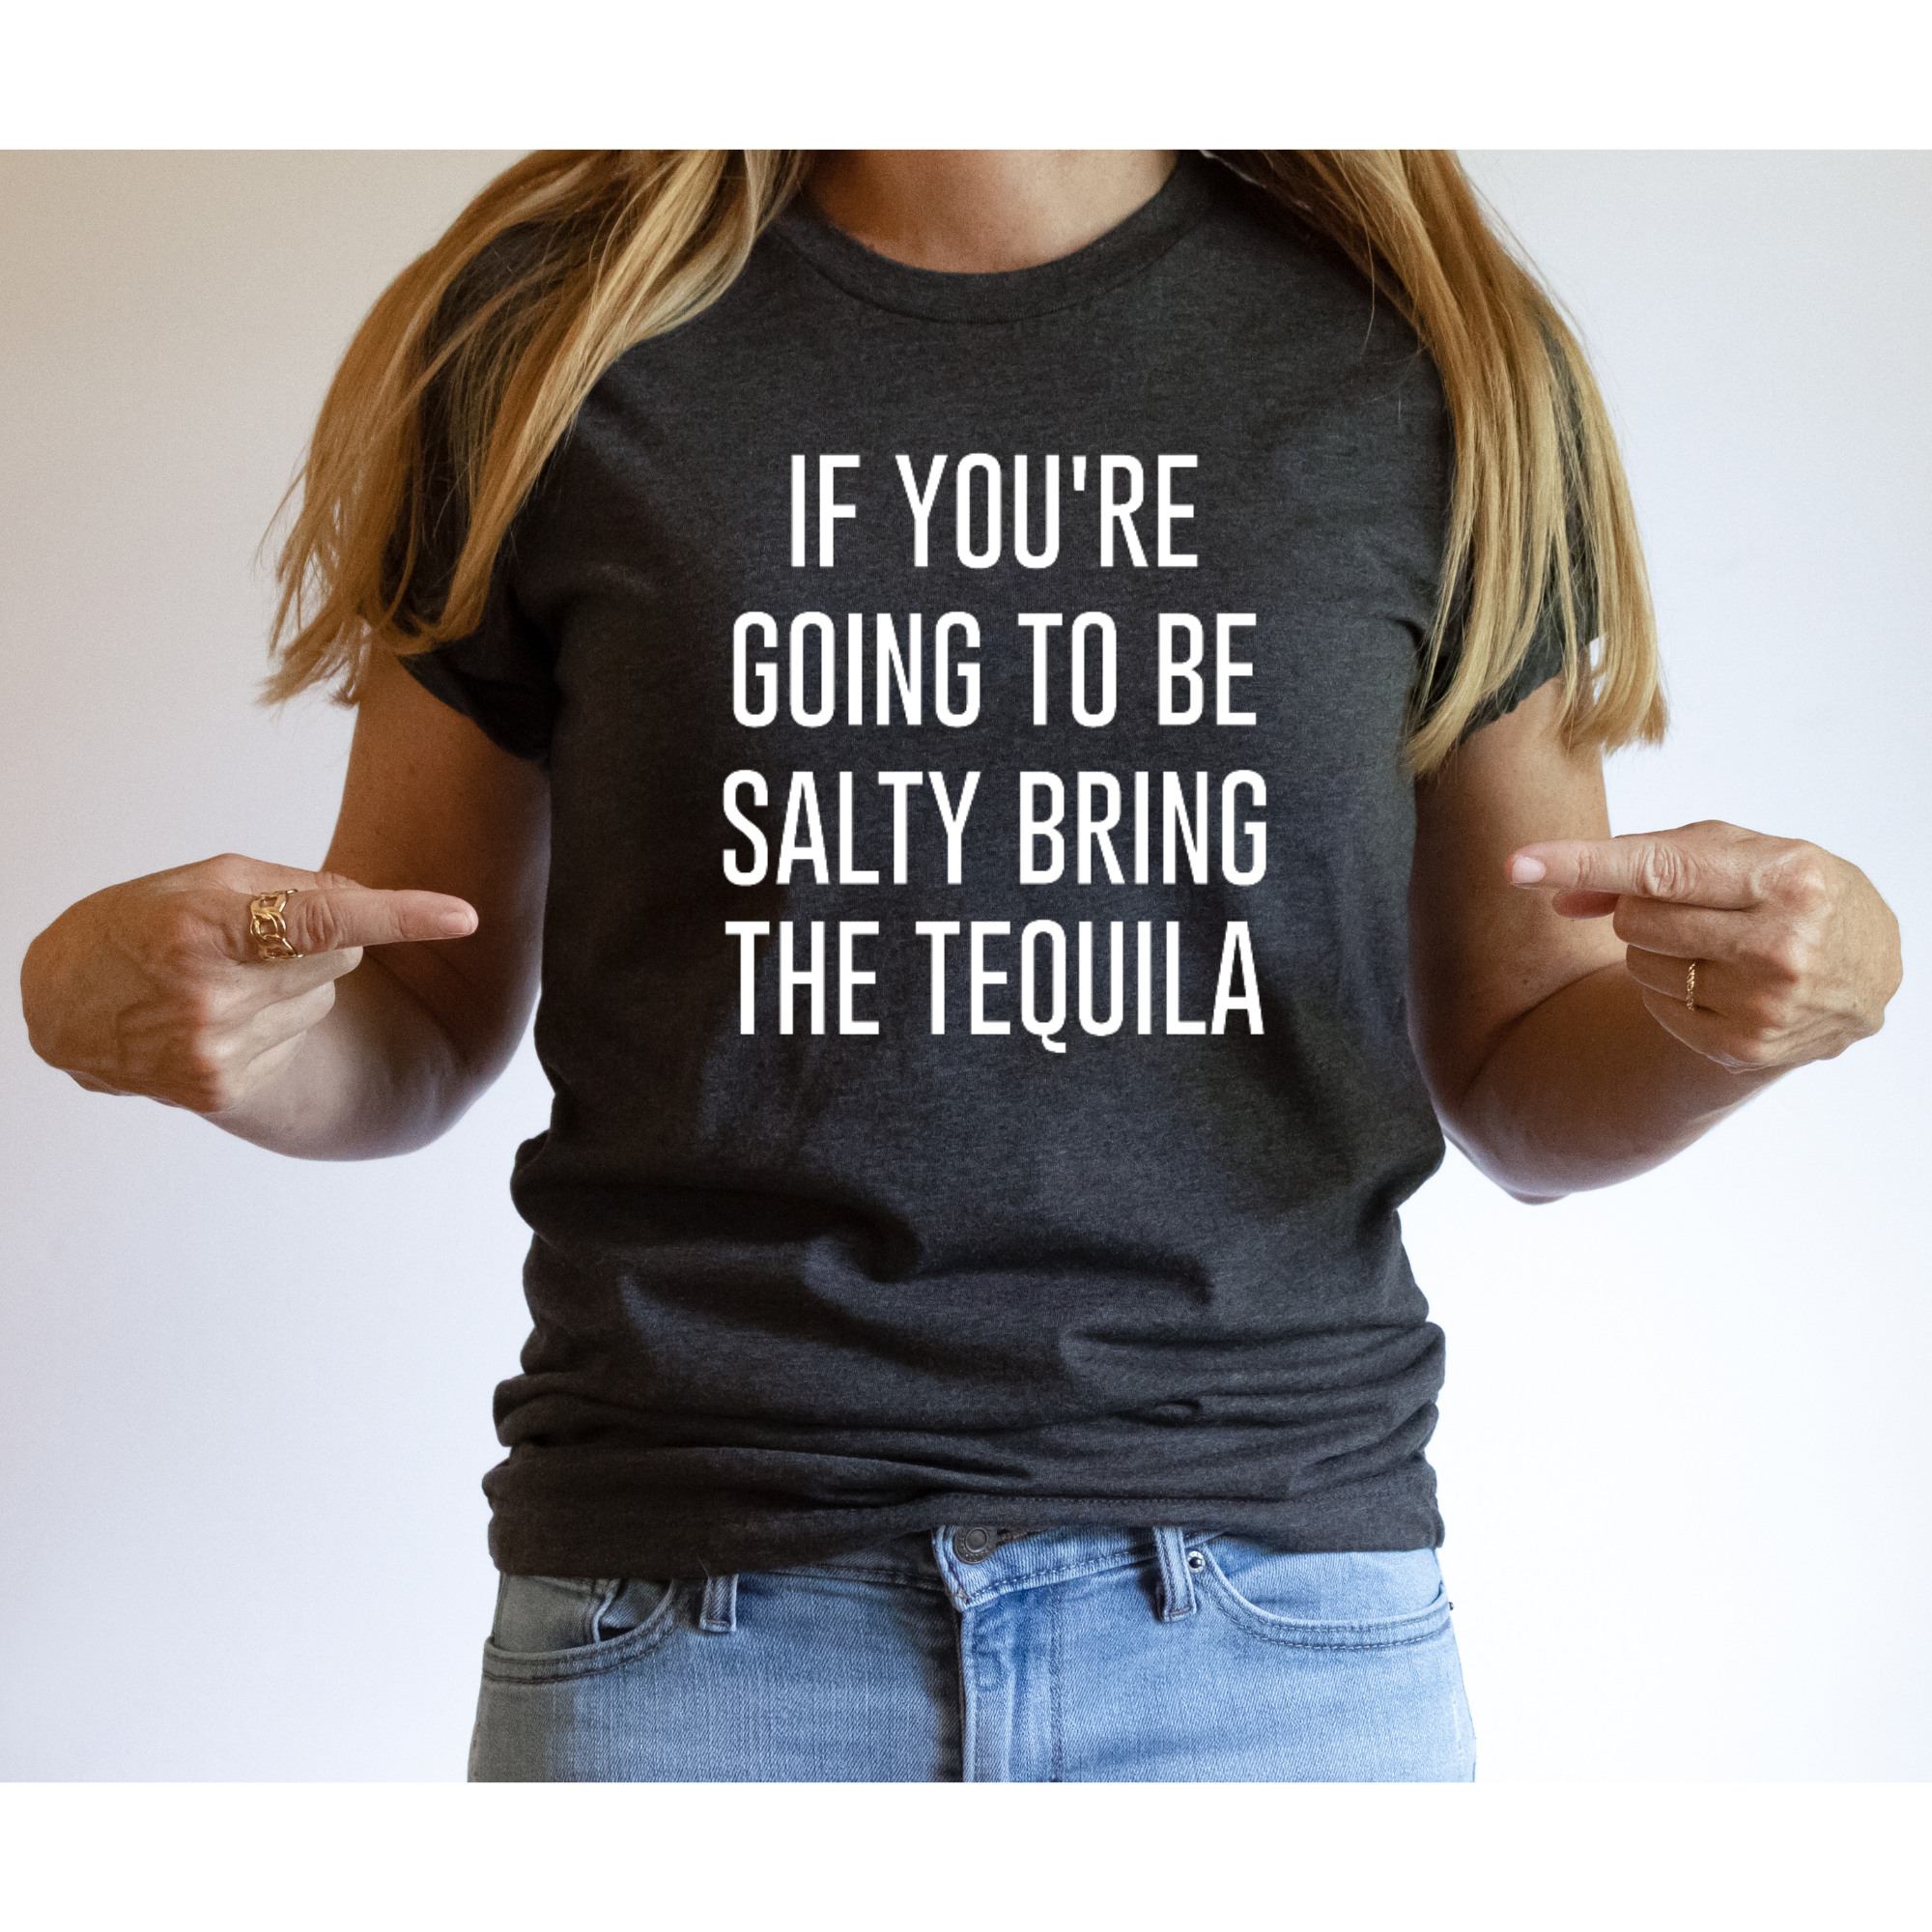 If You Are Going to be Salty Bring the Tequila Shirt - Gray